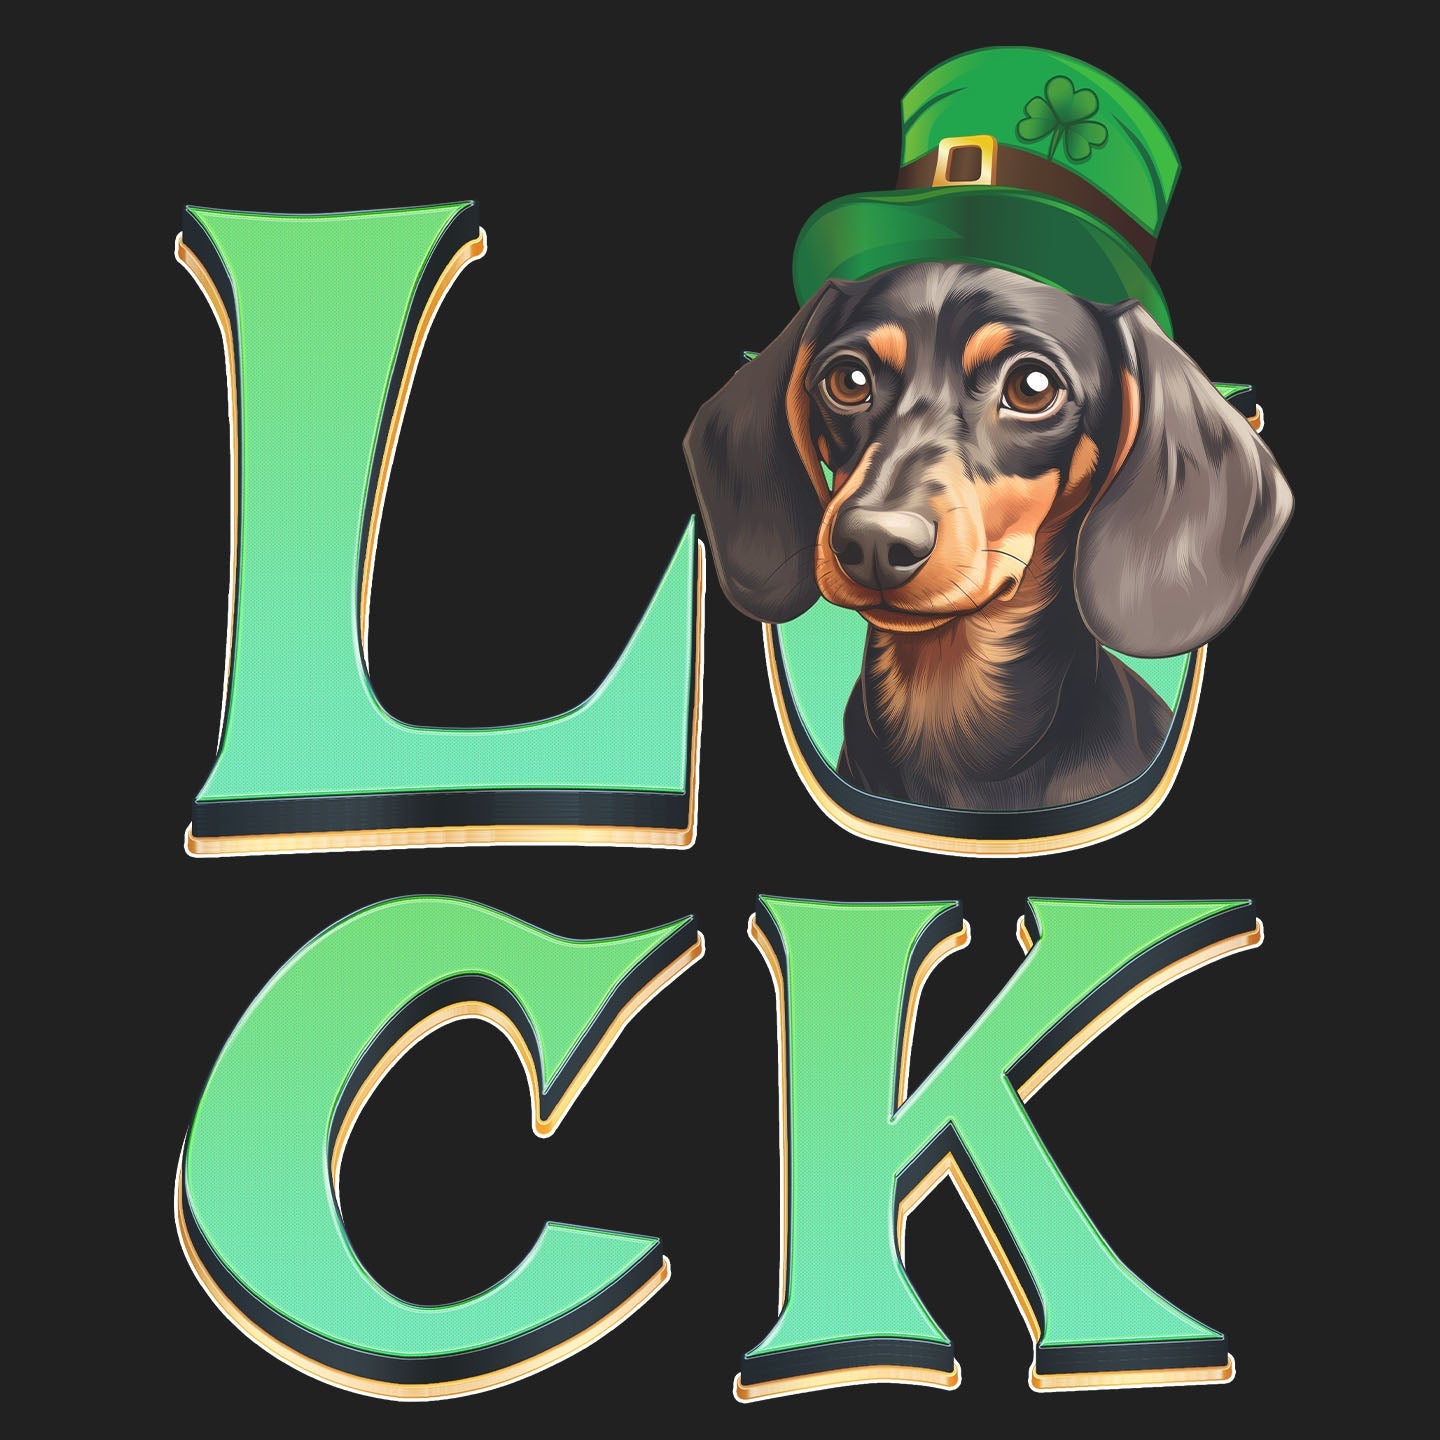 Big LUCK St. Patrick's Day Dachshund - Women's Fitted T-Shirt